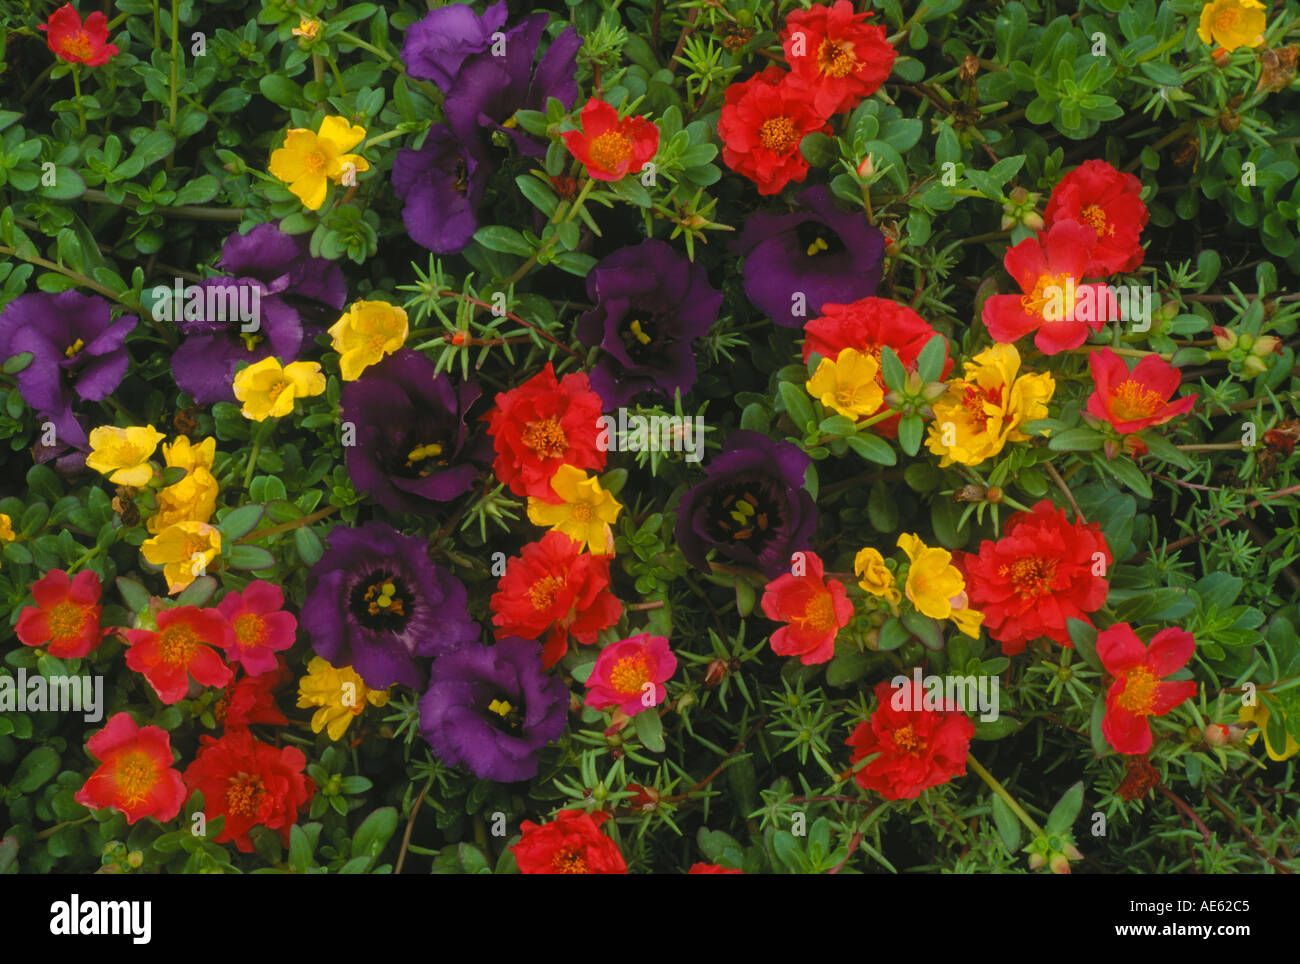 Portulaca flowers blooming together in bright colors, Missouri USA Stock Photo